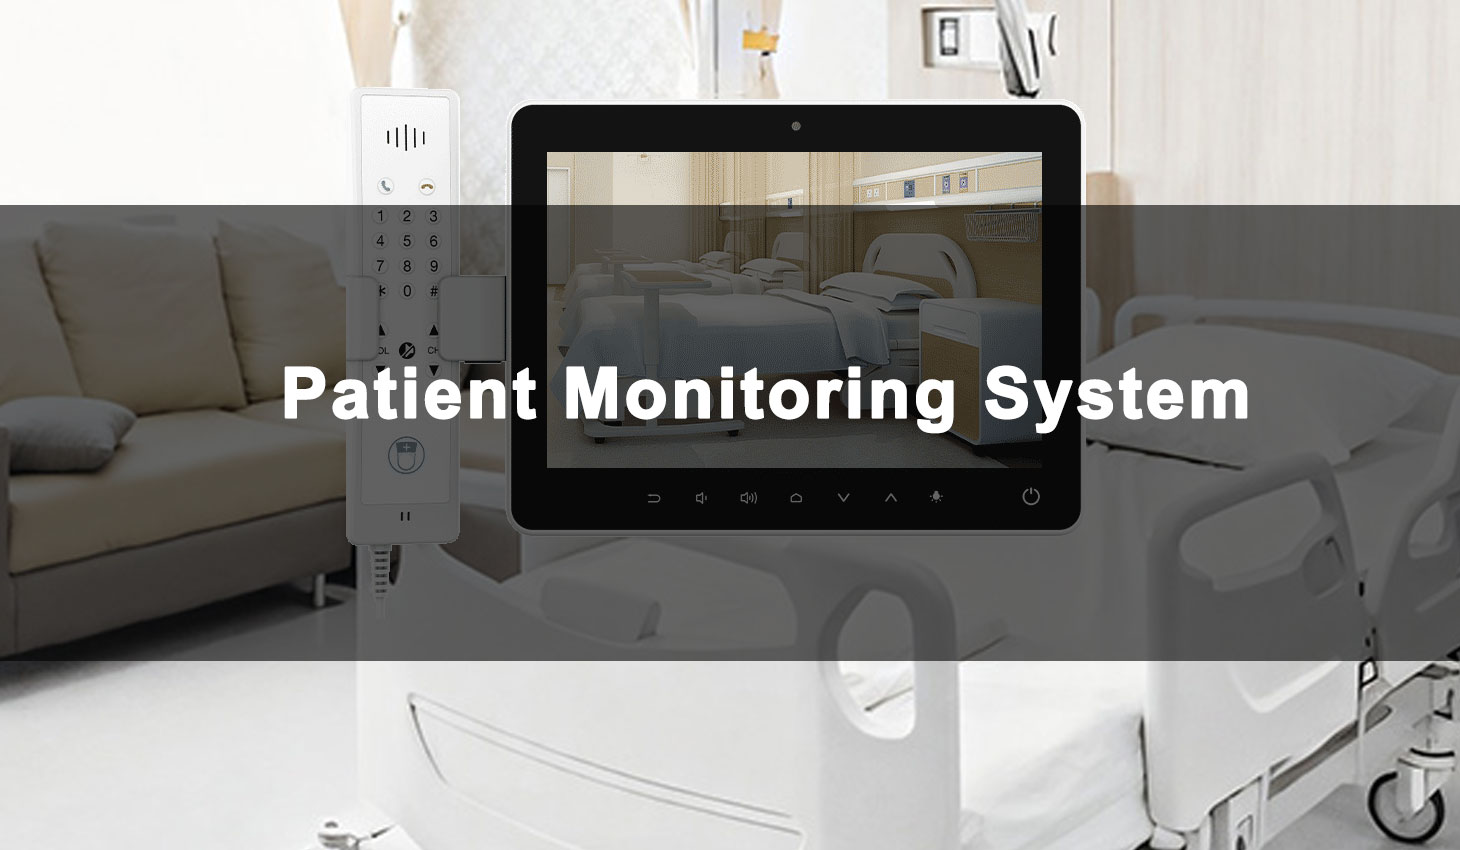 Revolutionizing Healthcare: The Patient Monitoring System